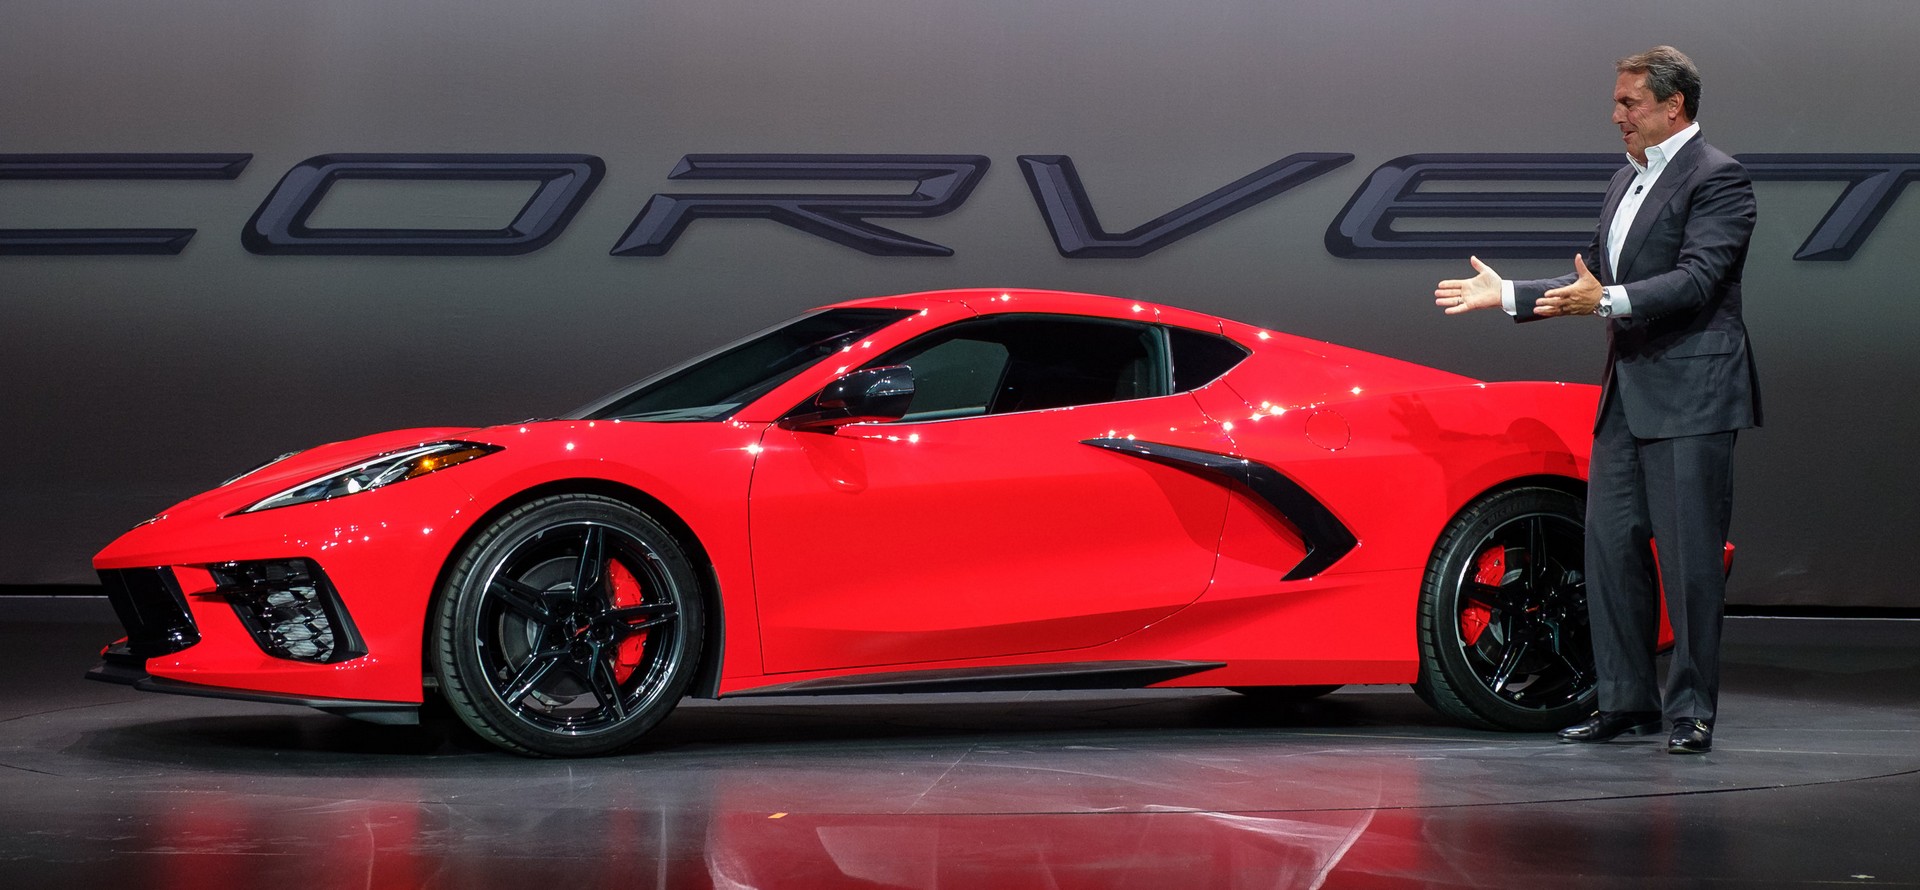 2020 Corvette C8 Is America's Mid-Engine Sports Car For The Masses